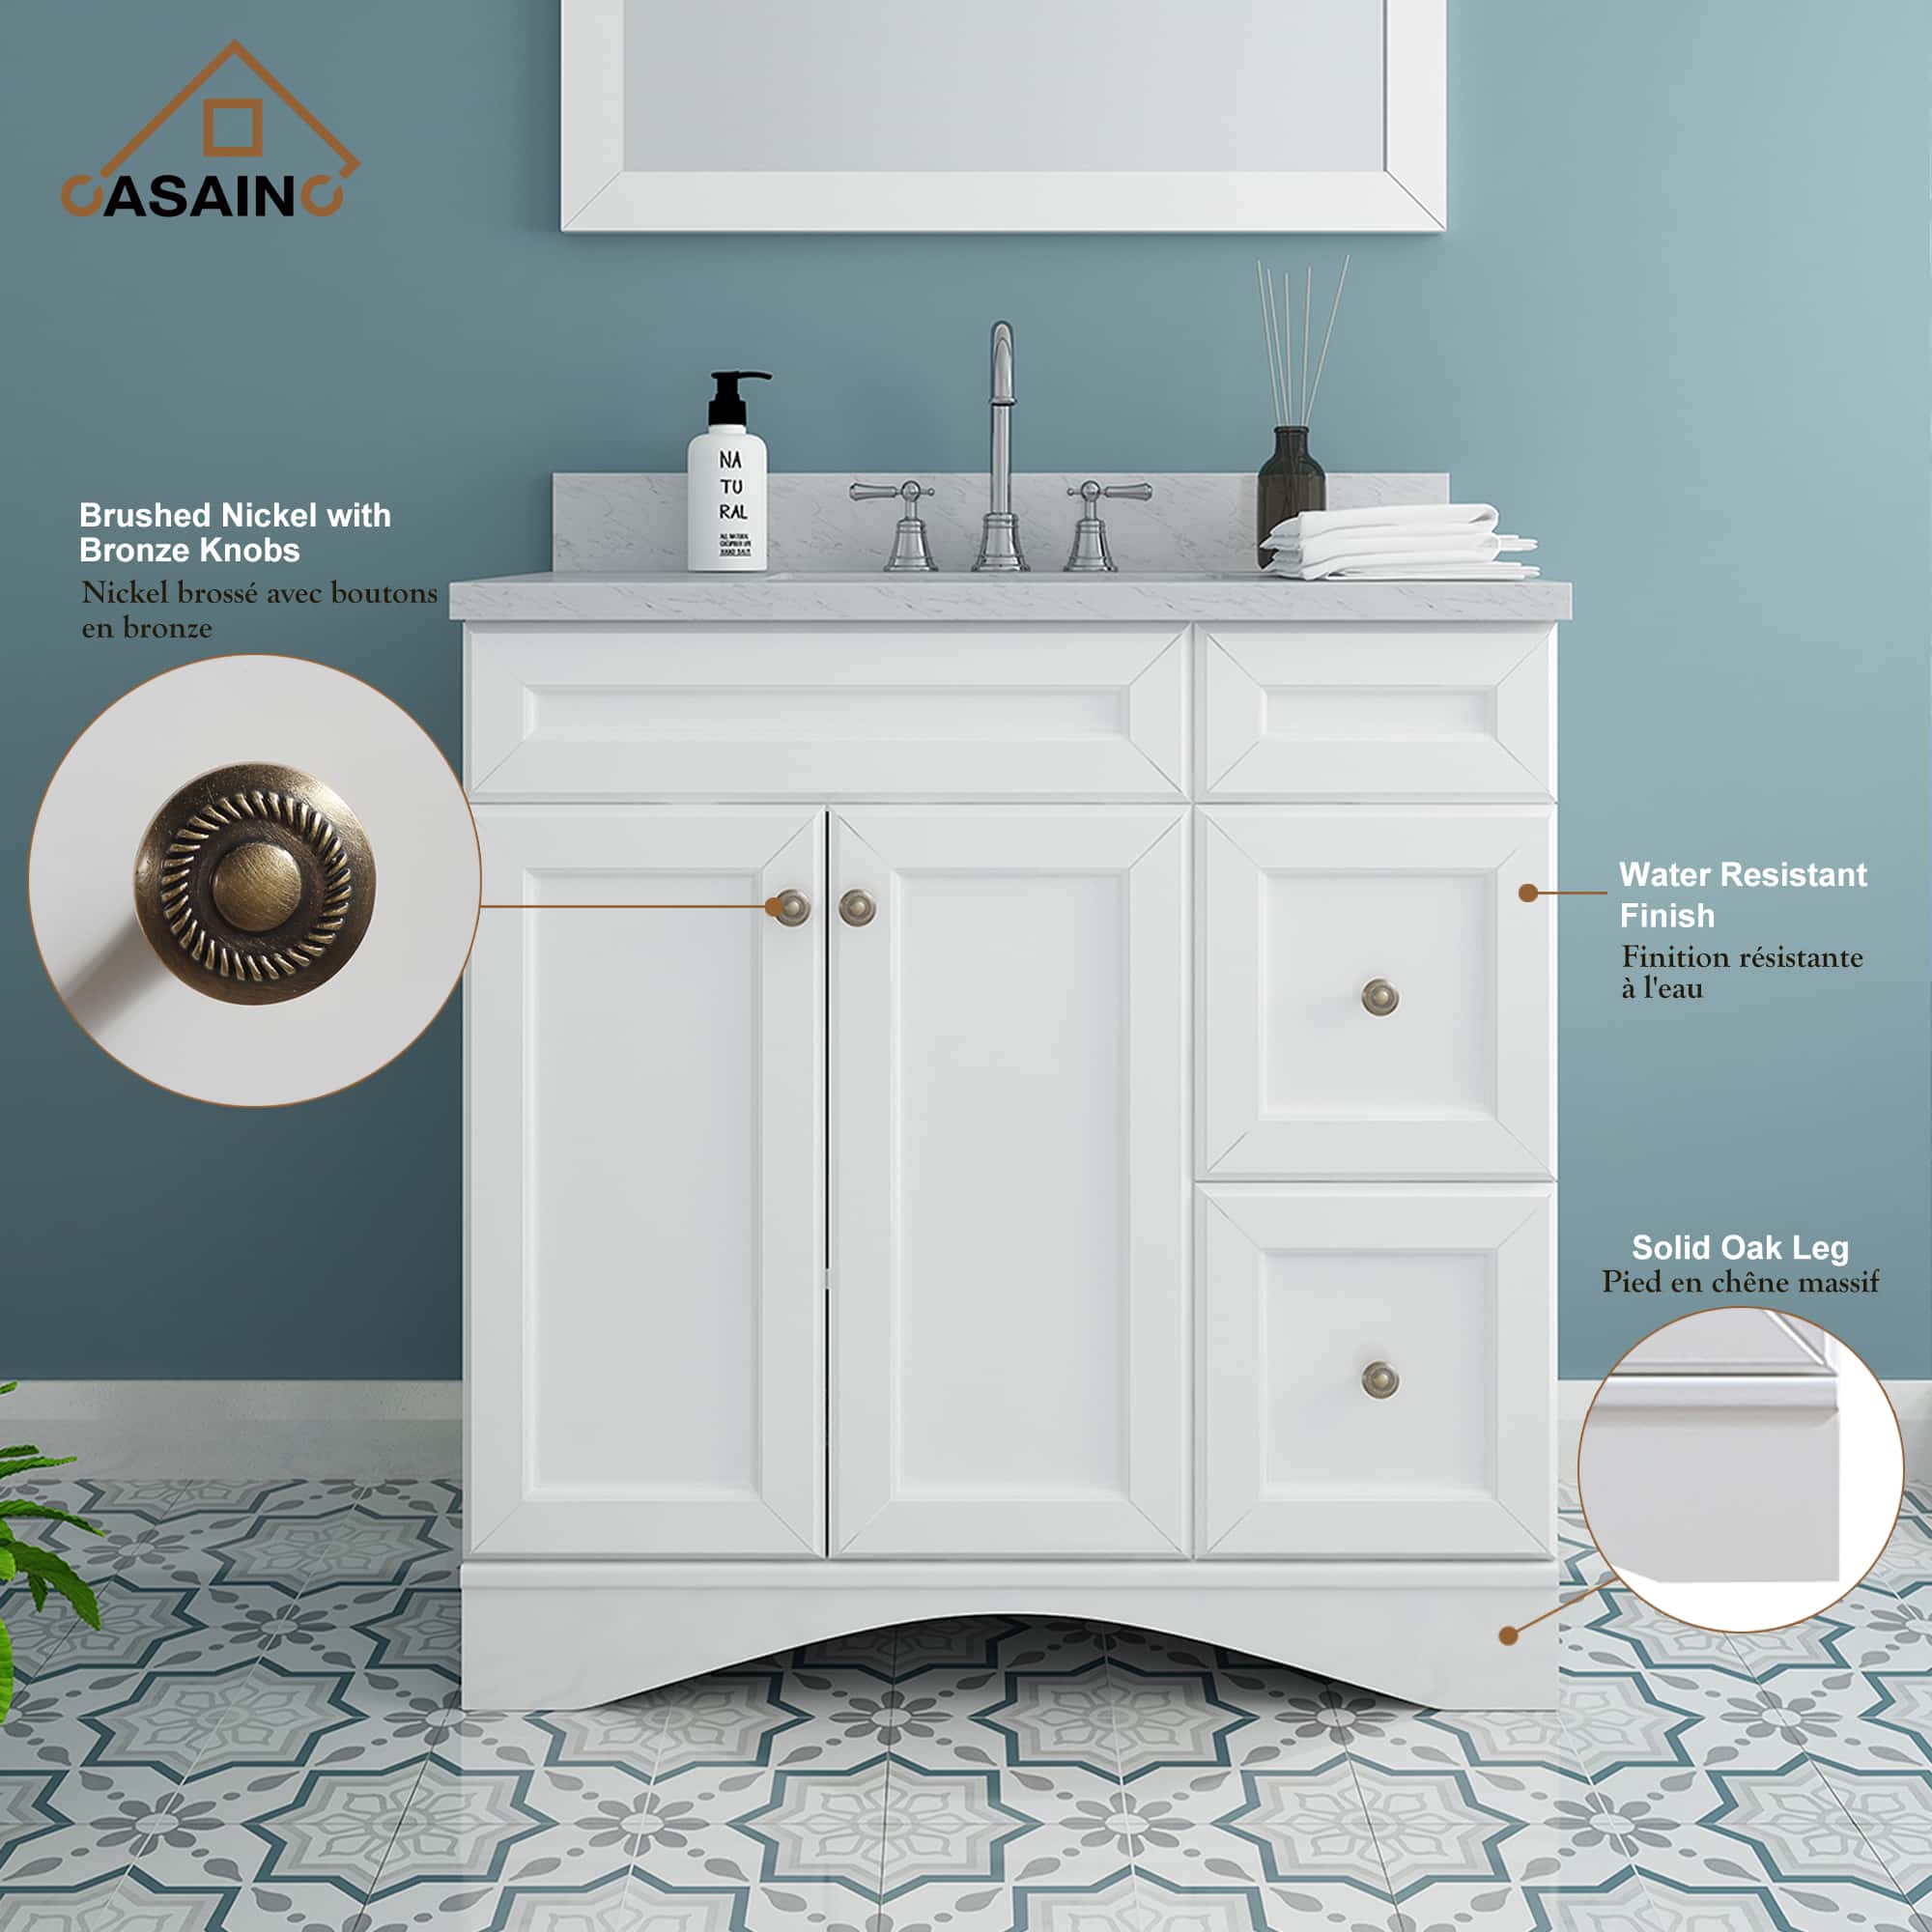 36 in. W x 22 in. D x 35.4 in. H Single Sink Bath Vanity in White with Top and LED Mirror